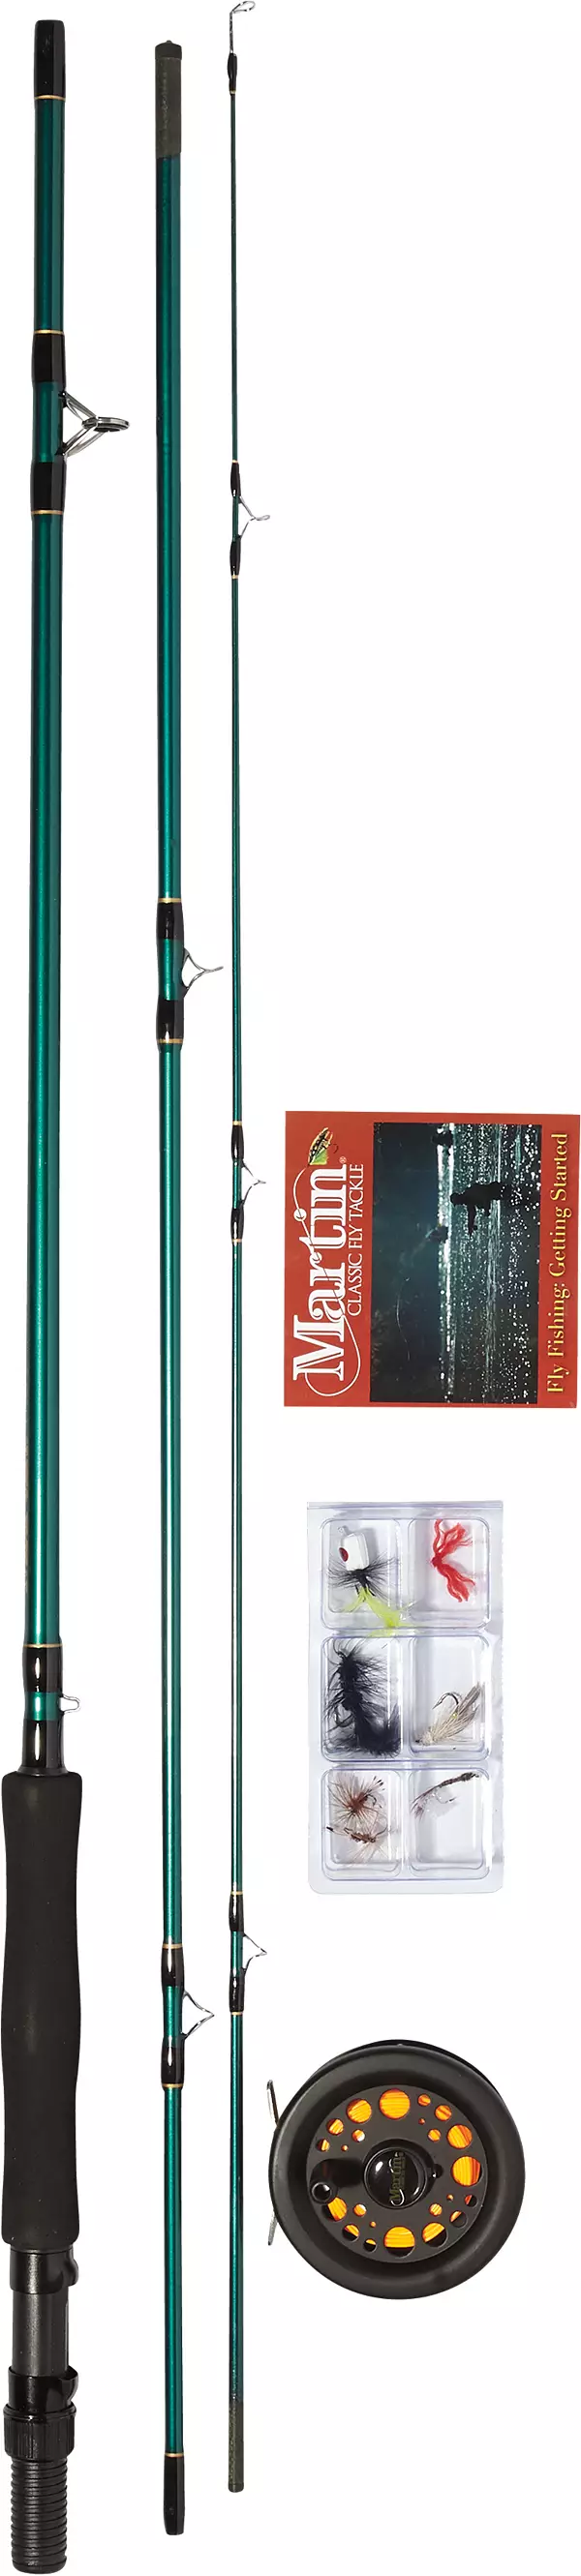 Martin Complete Fly Fishing Kit - LW 5/6 - 8' / 3 pieces ~ CASE OF